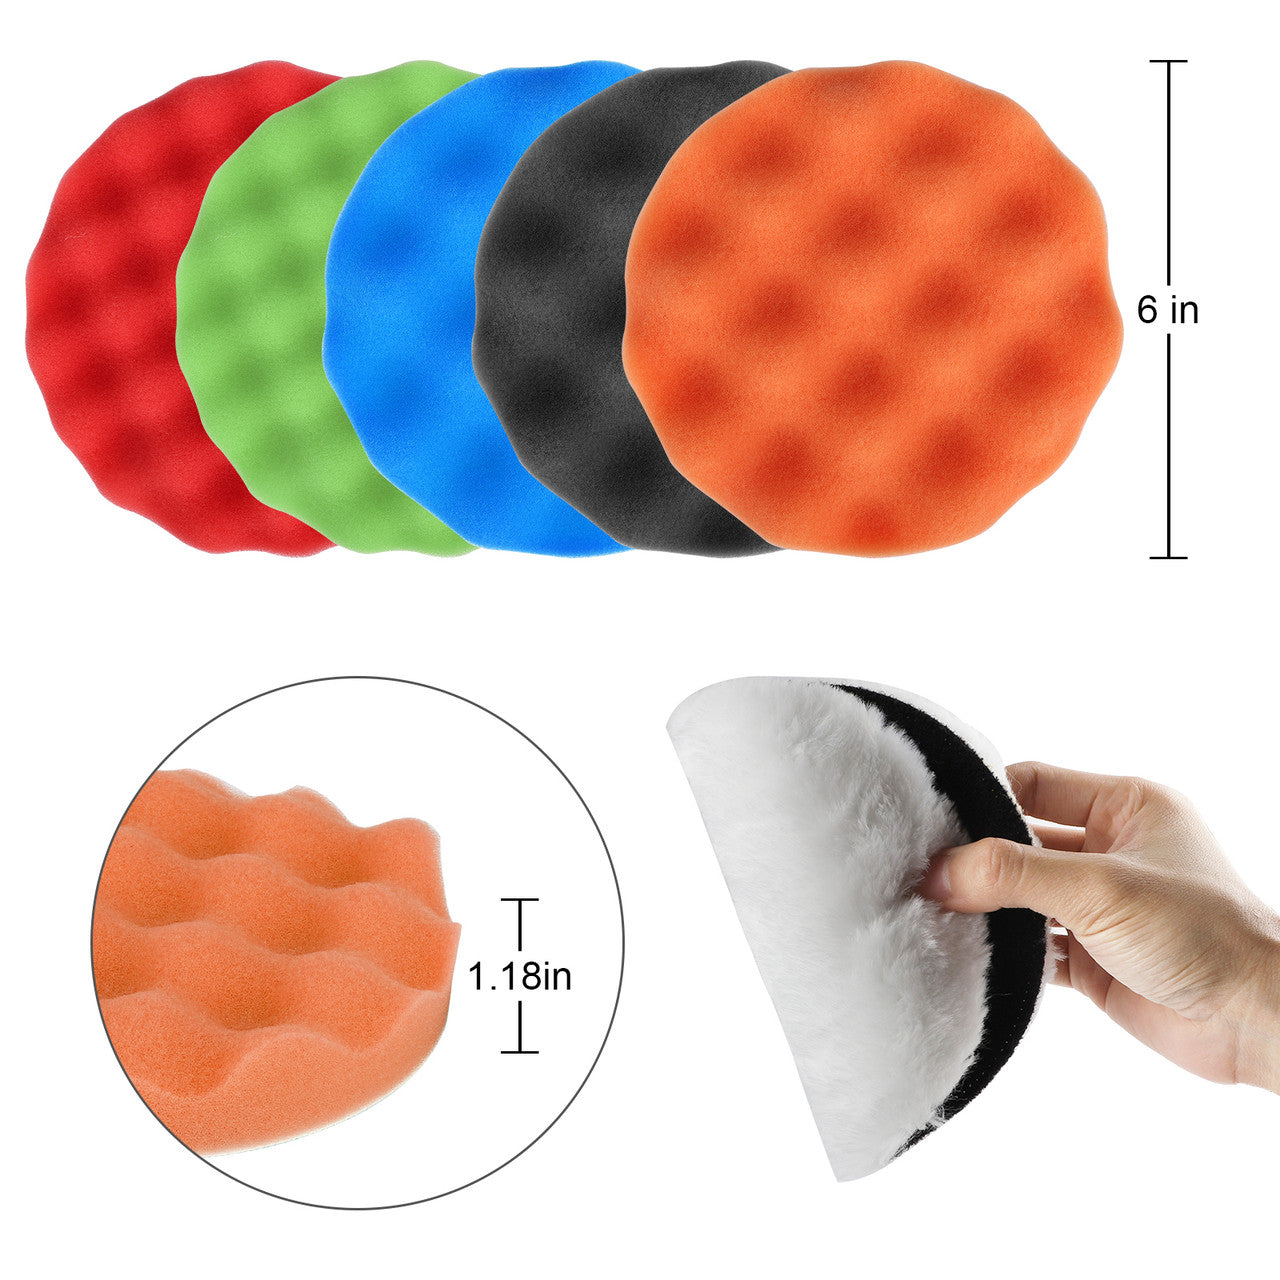 6Pcs Polishing Buffing Pad, Multi-color Polishing Pad with Different Hardness, 6" Buffing Pads Woolen Polishing for Car Sanding, Polishing, Waxing, Sealing Glaze, Washable & Reusable